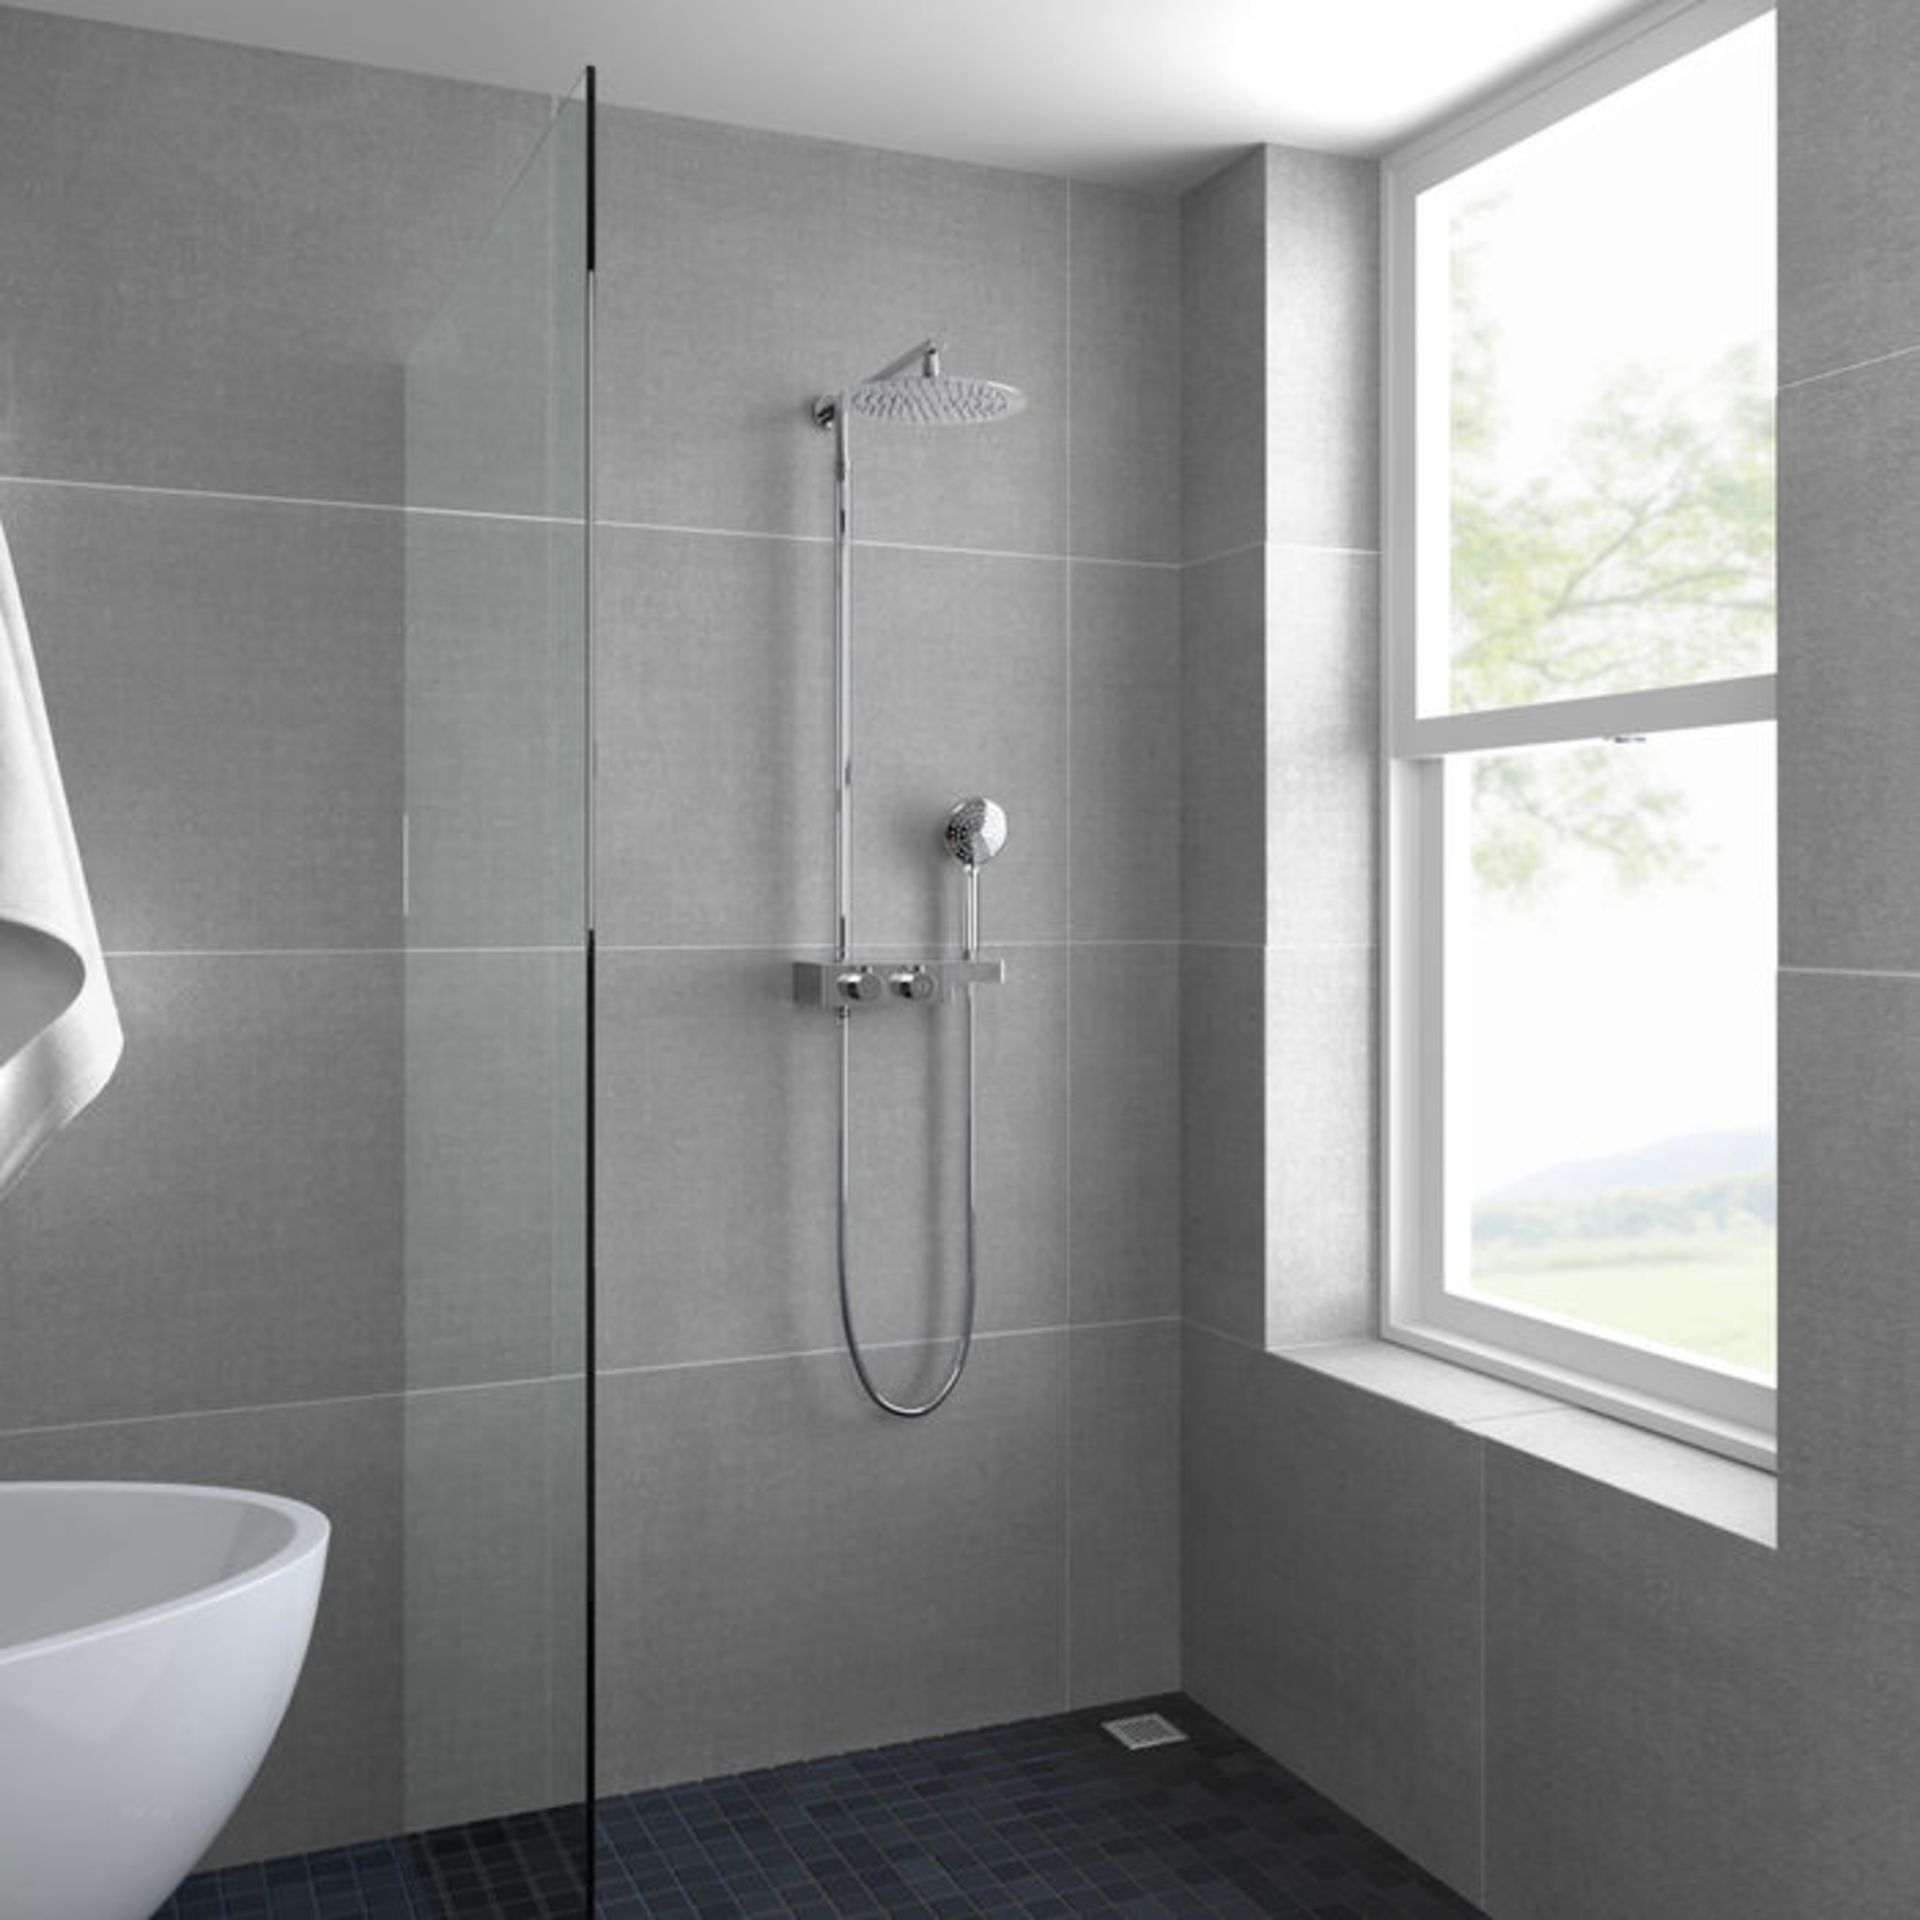 (S41) Round Exposed Thermostatic Mixer Shower Kit & Large Head. Cool to touch shower for - Image 3 of 6